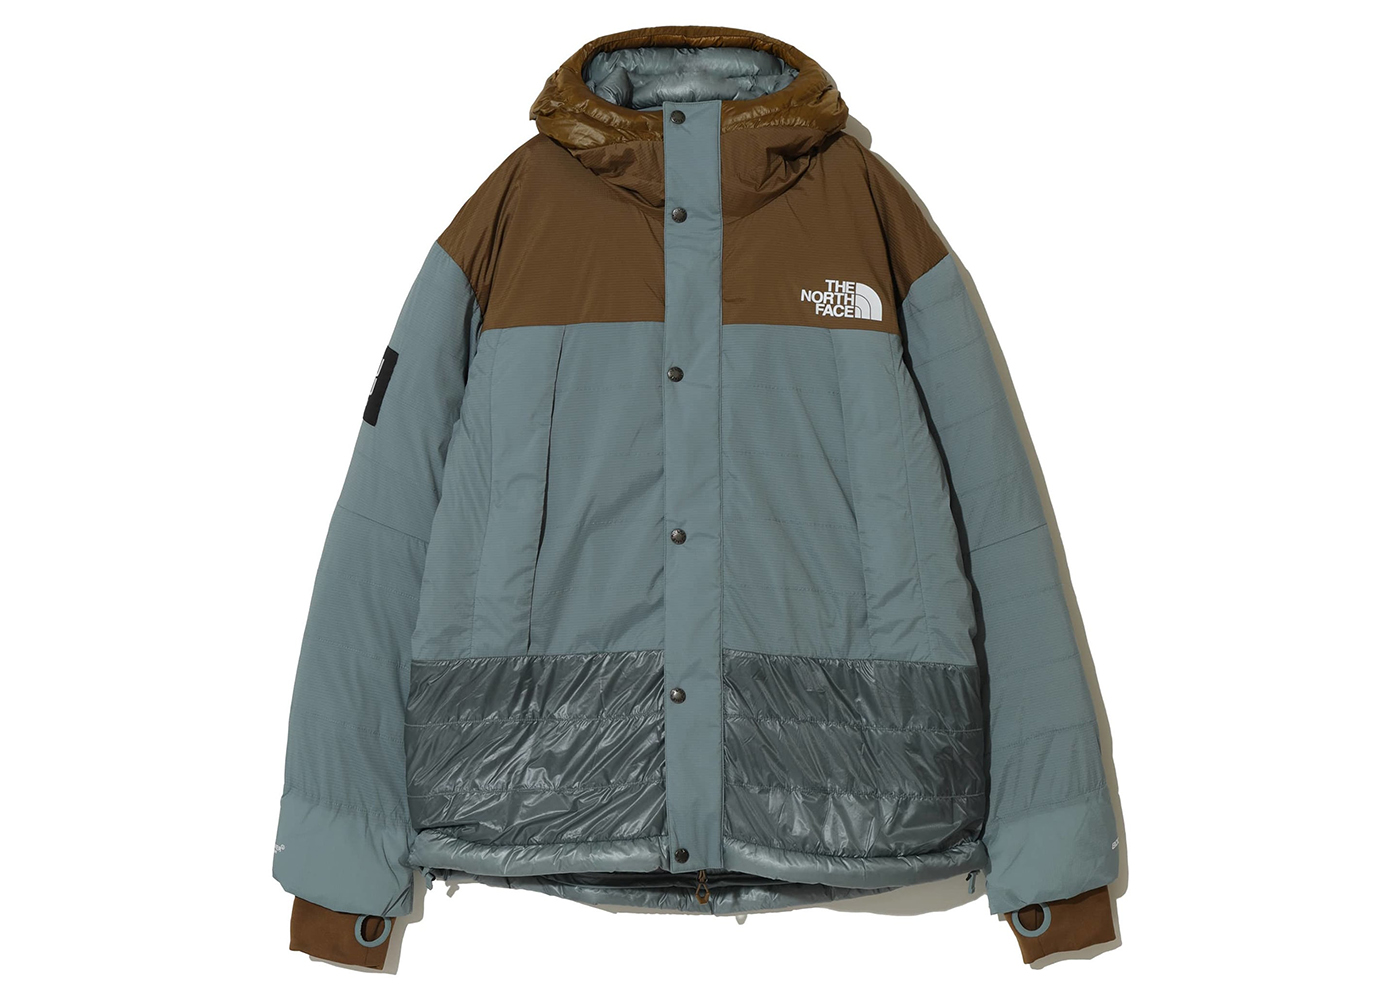 The North Face x Undercover Soukuu 50/50 Mountain Jacket Sepia 